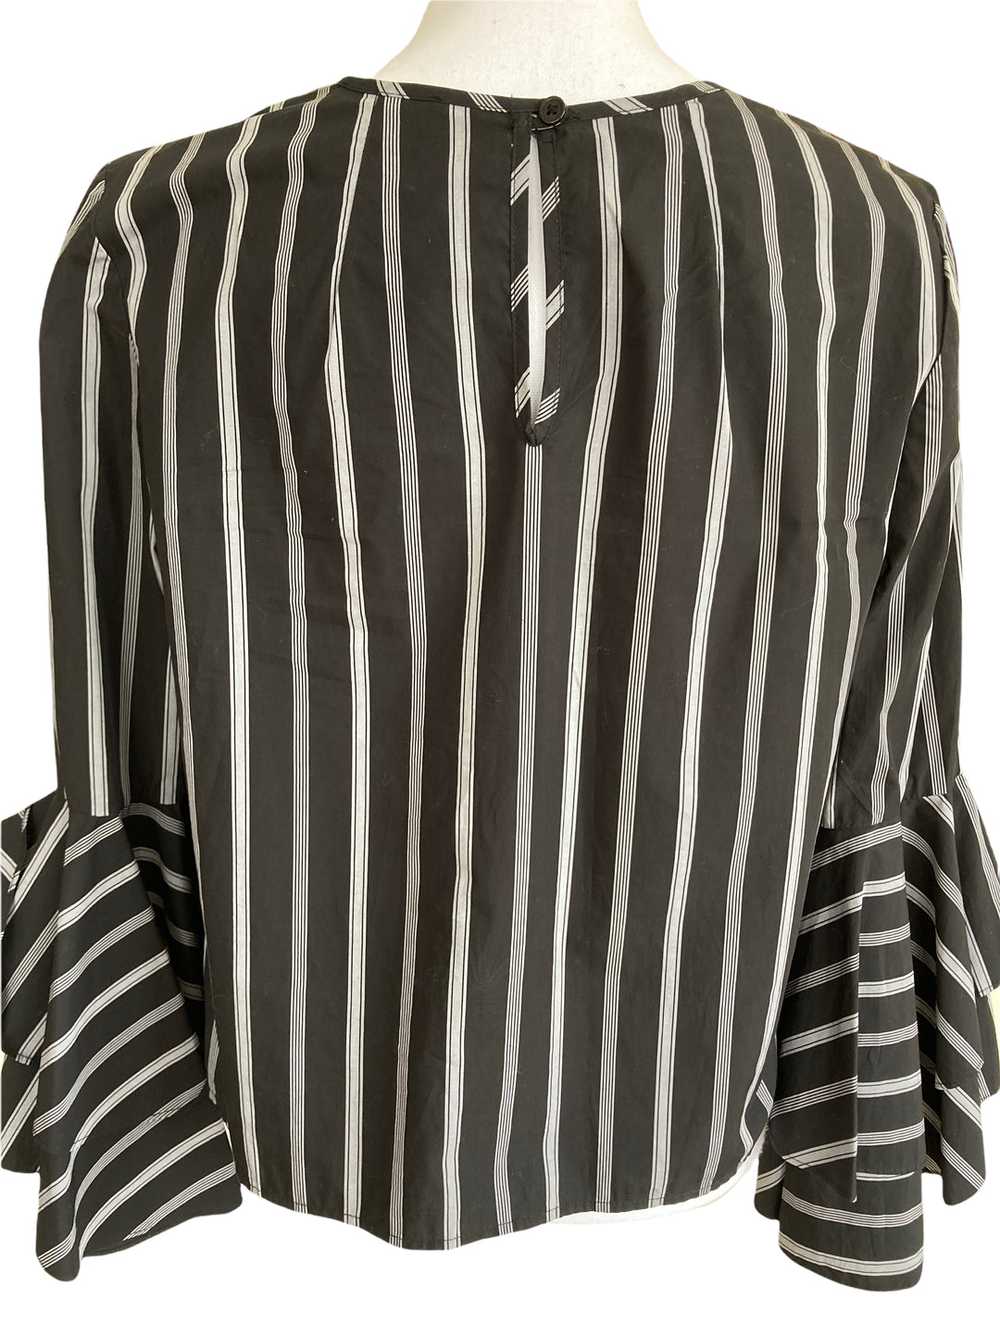 Milly Black and White Bell Sleeve Top, 8 - image 7